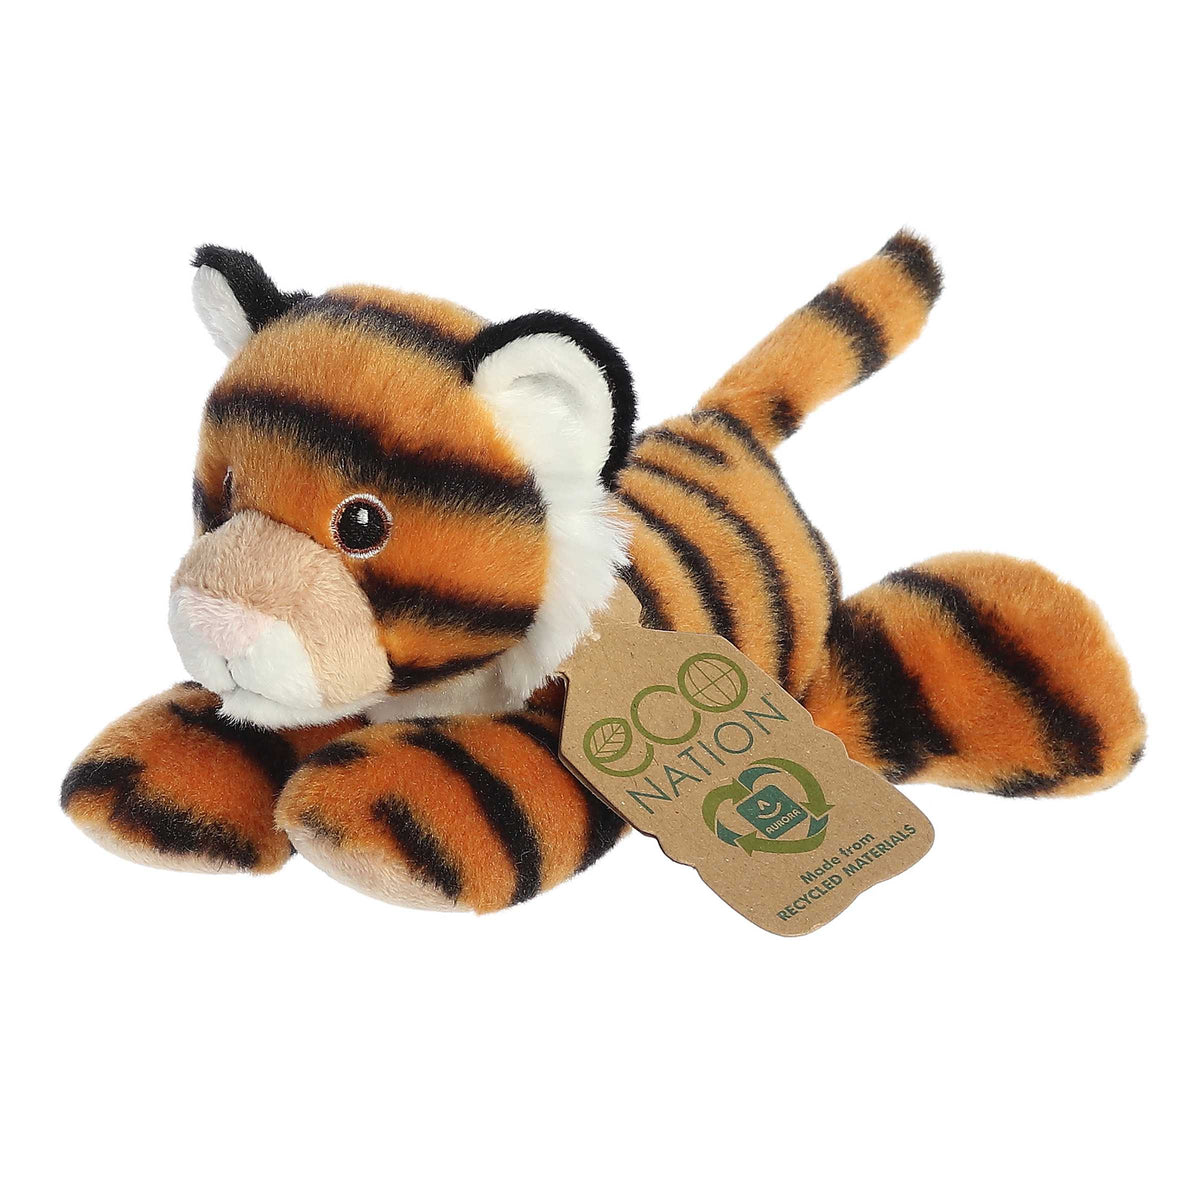 Eco Softie Tiger Plush by Aurora, featuring vibrant stripes and an 'Eco Nation' tag, crafted from recycled materials